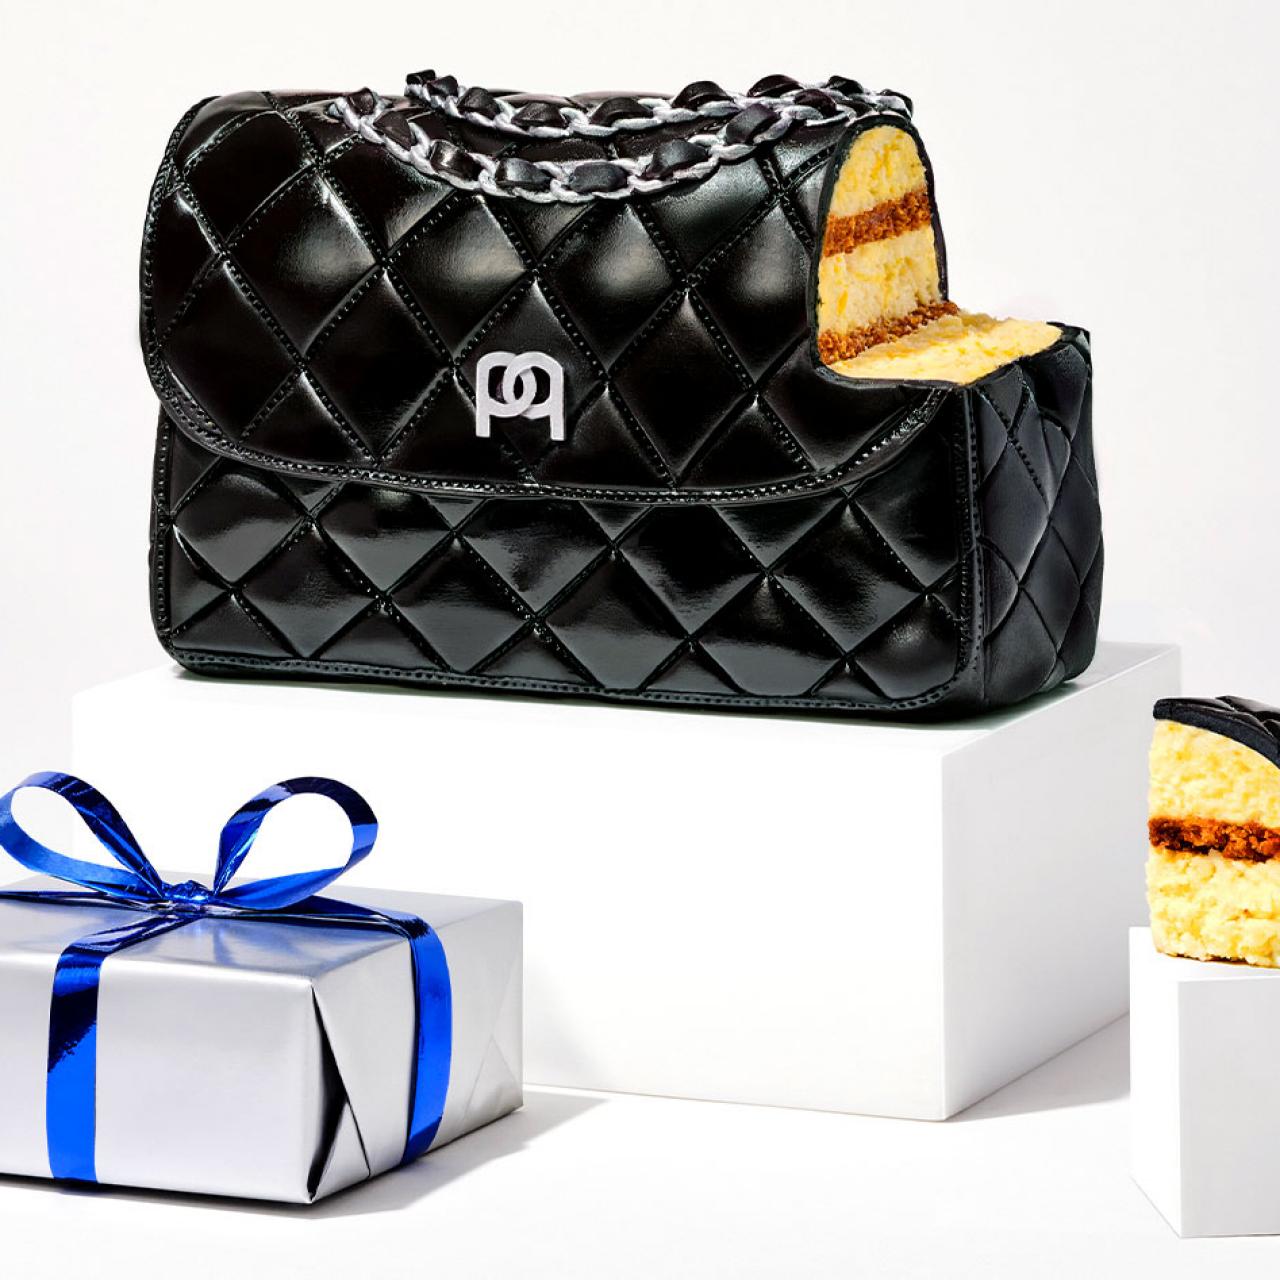 CHANEL, Bags, Chanel Bag Ribbon Wrapping Paper